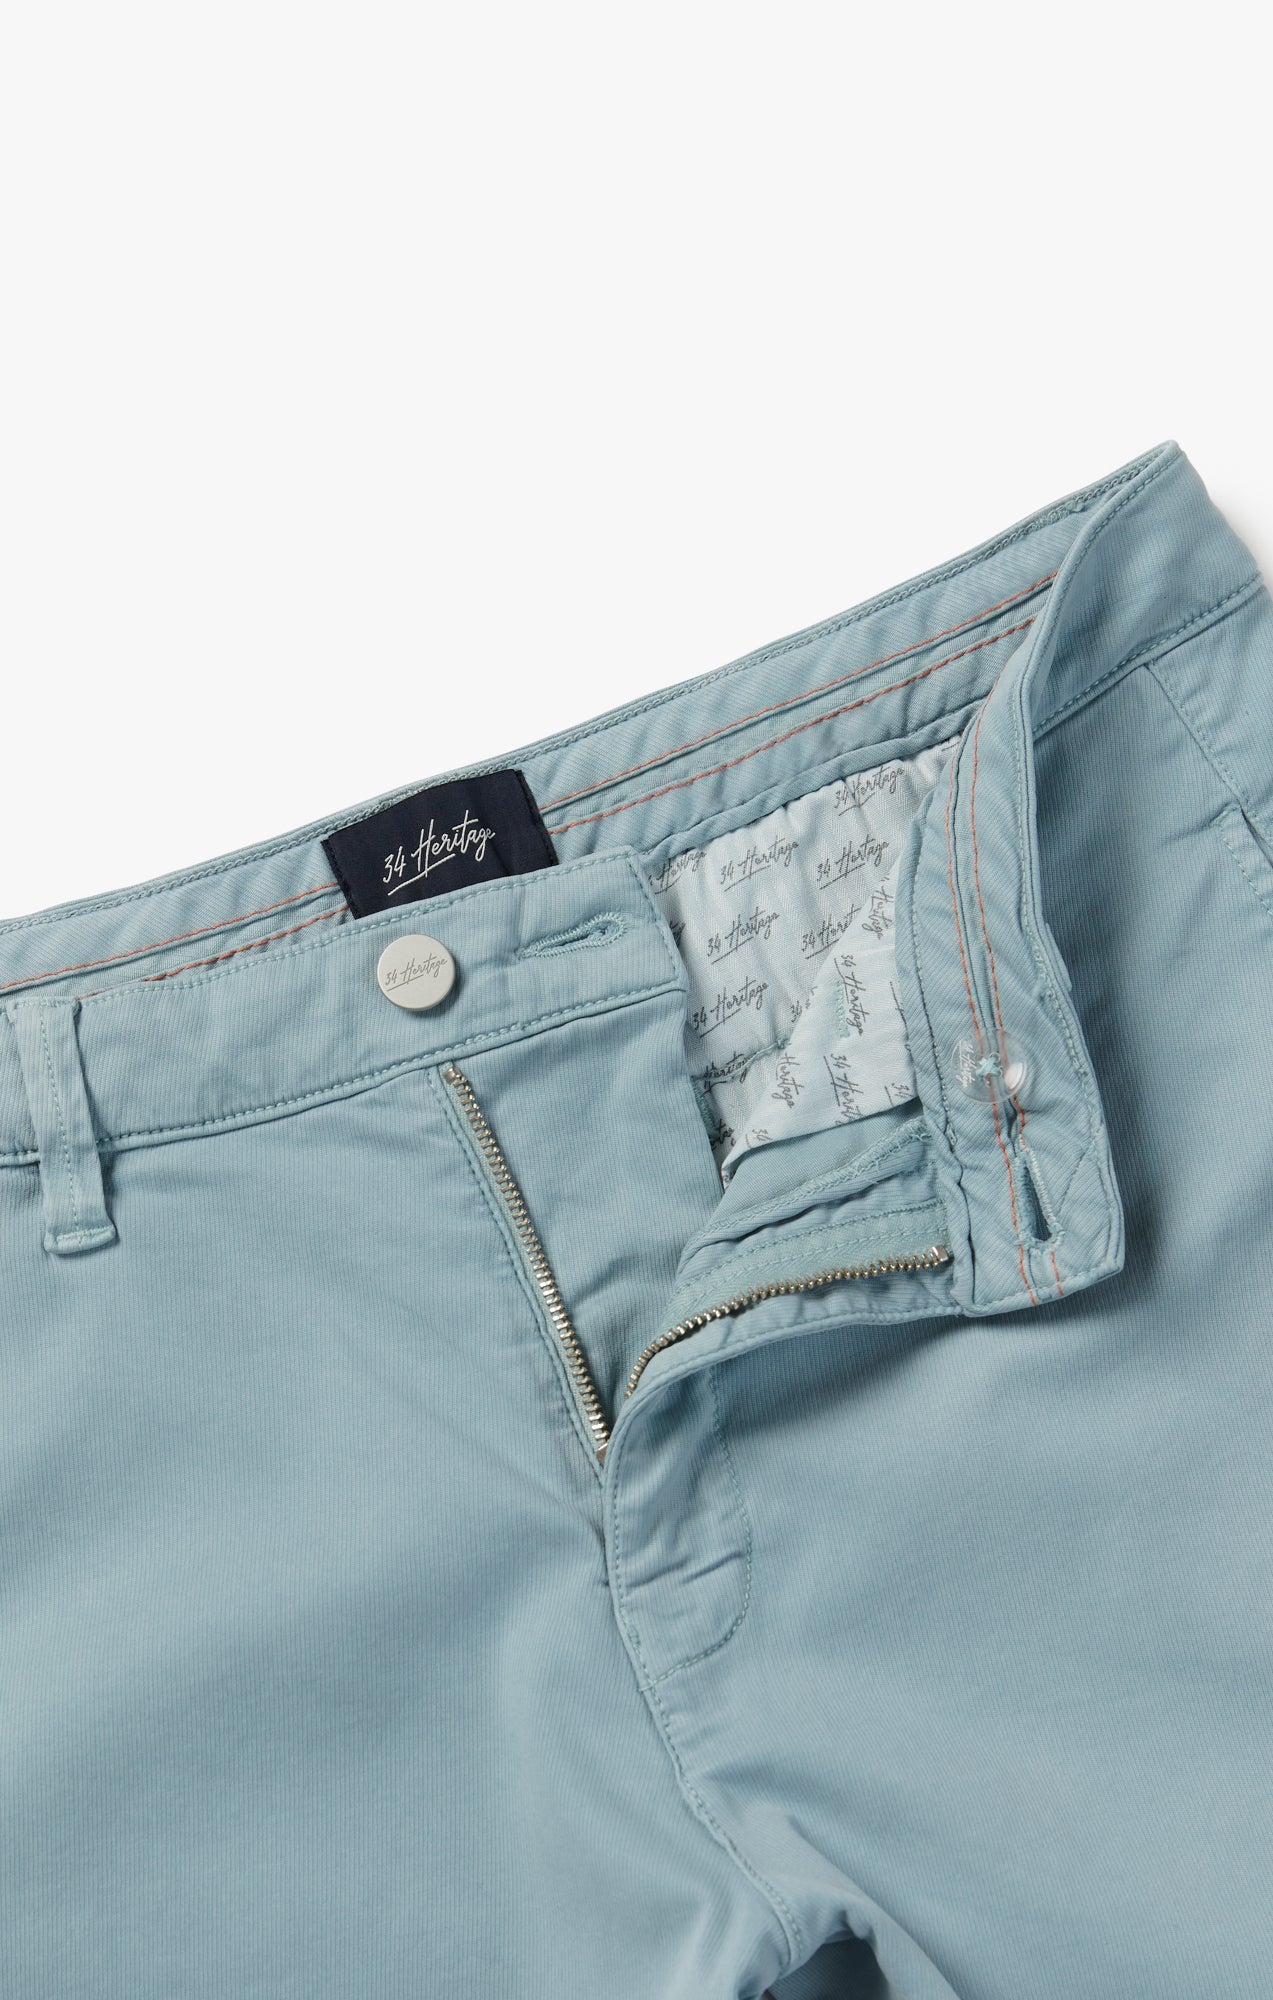 Nevada Shorts in Light Blue Soft Touch